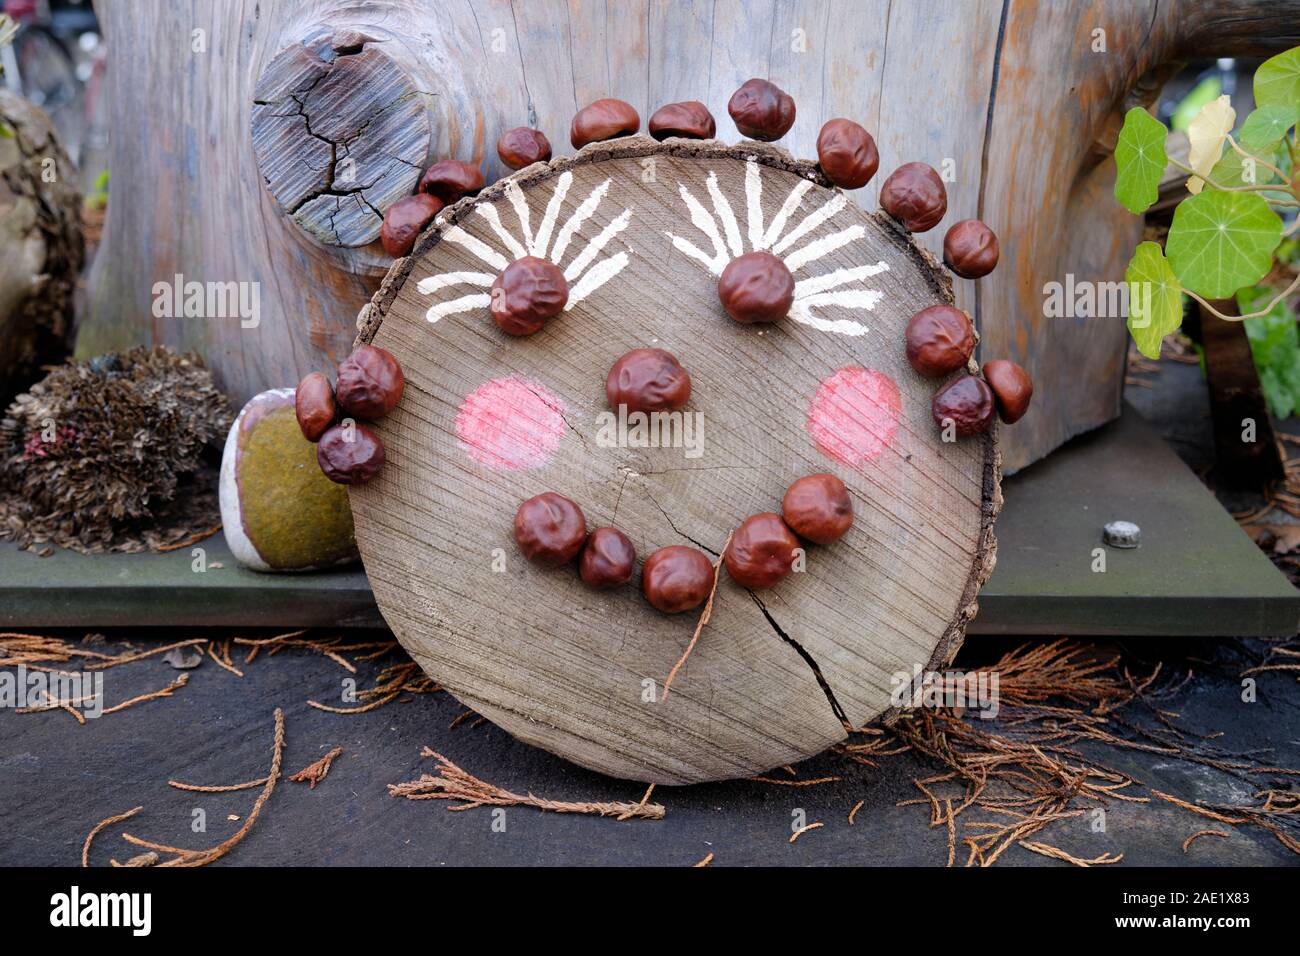 Smiling face made of chestnuts on a cut lug slice left as a decoration. Stock Photo